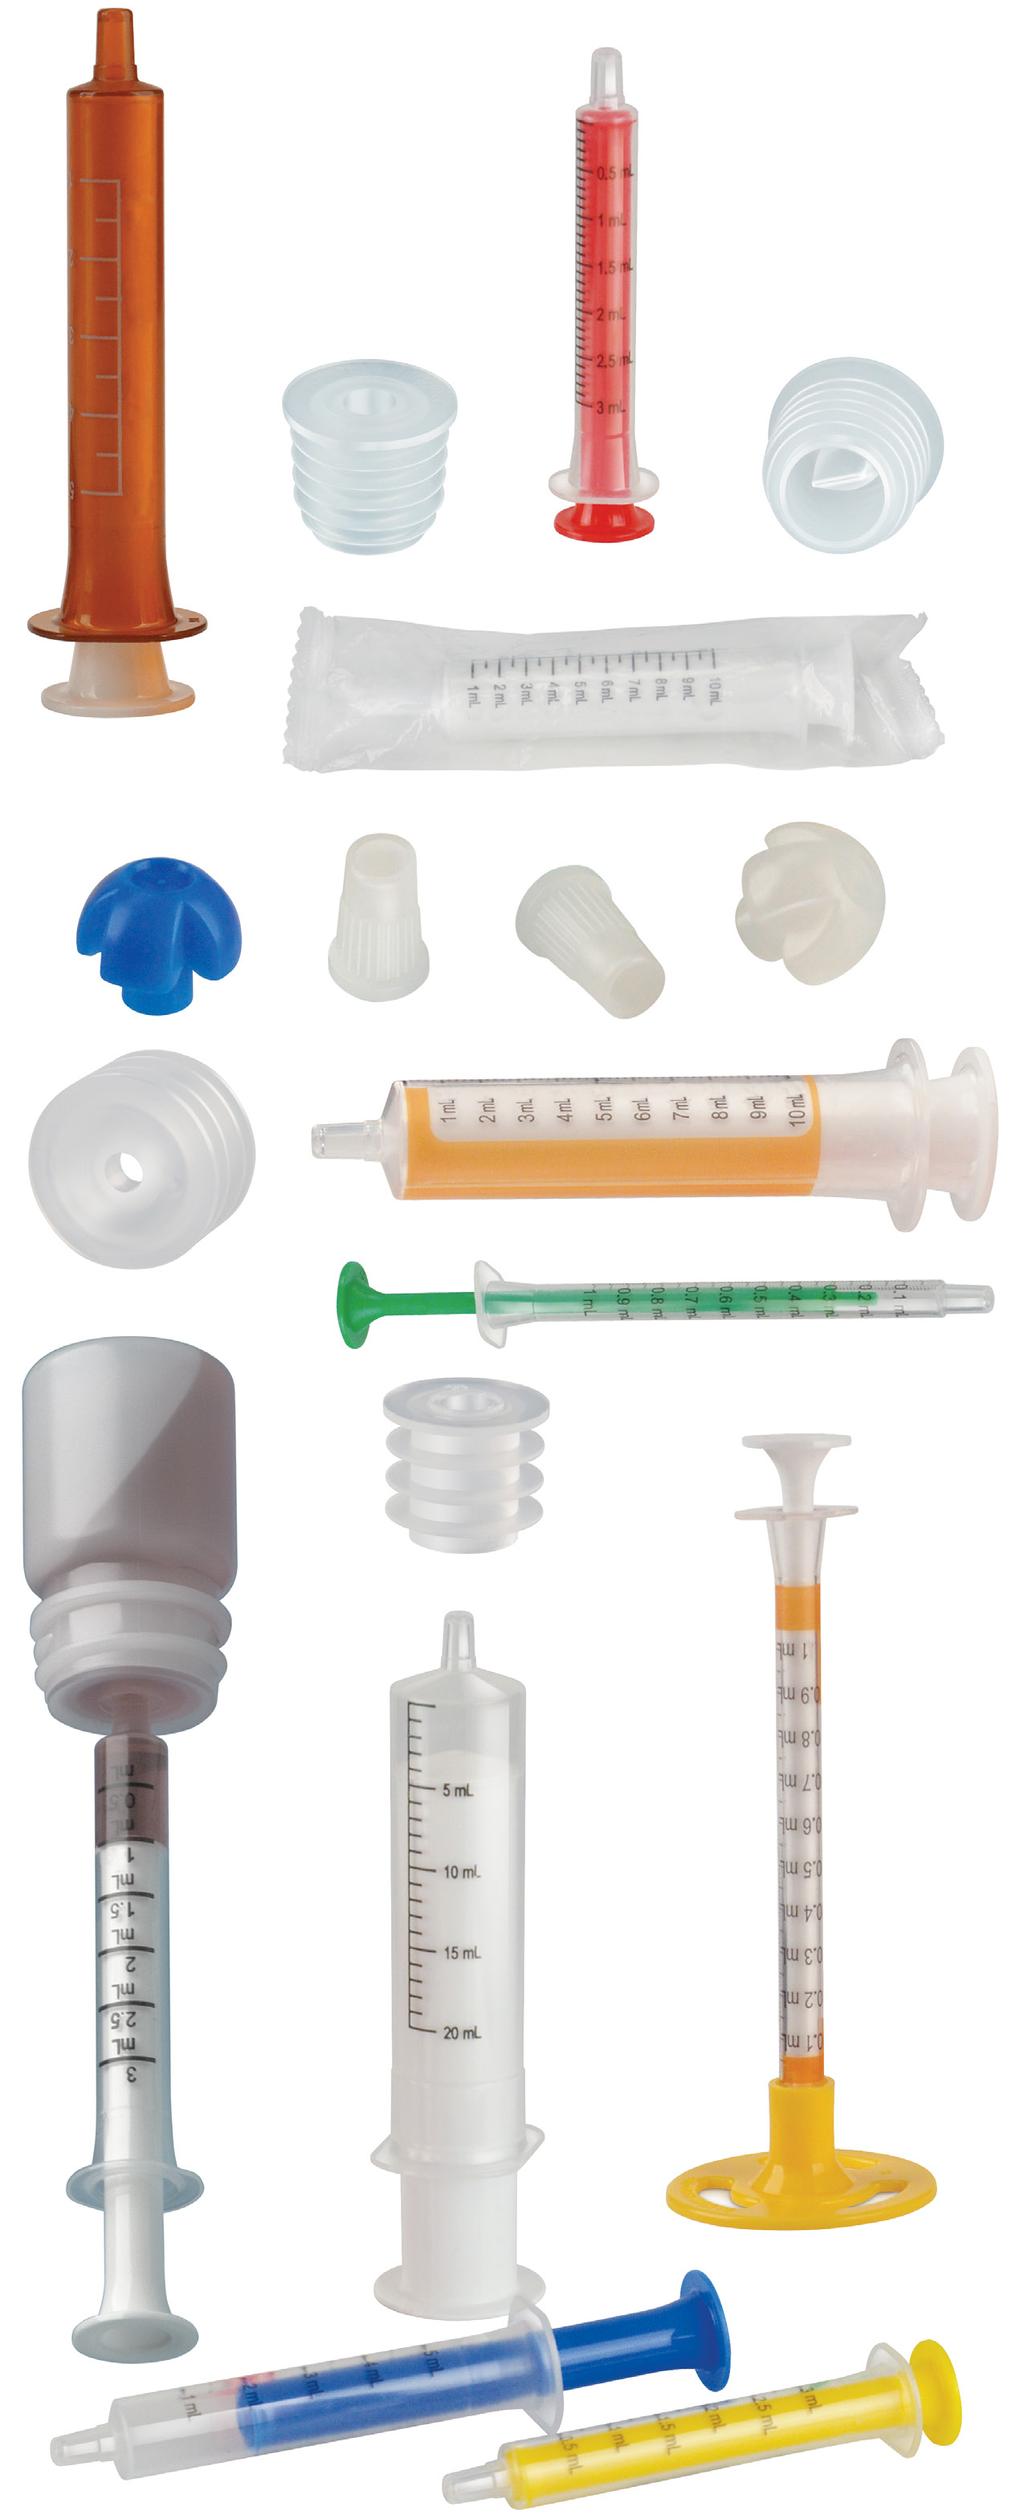 Competitive designs with silicone rubber seals require greater force to move the plunger in the syringe after the samples